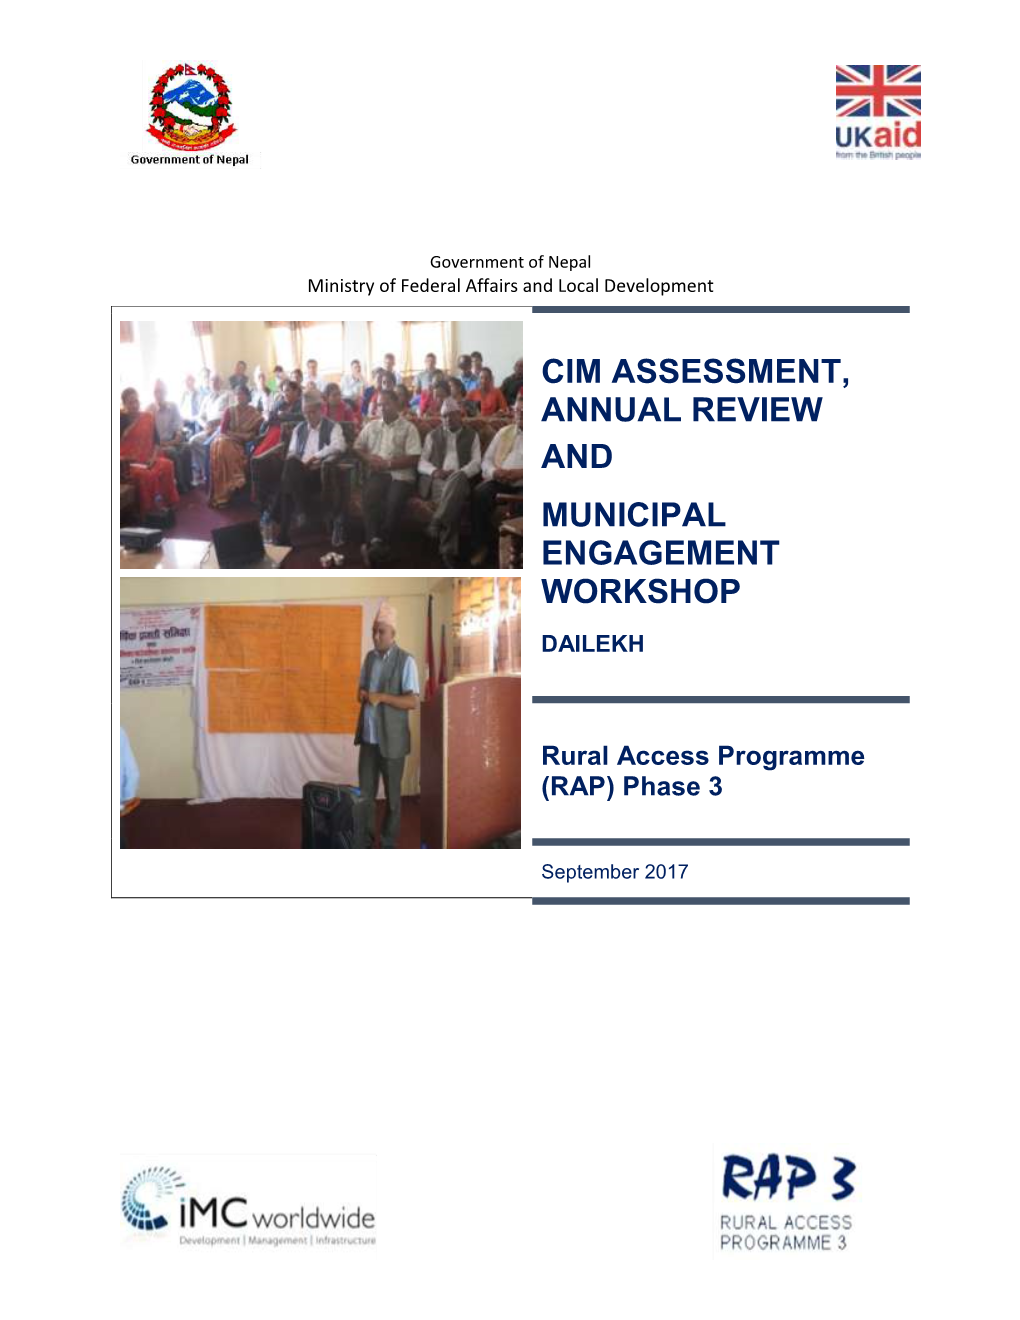 Cim Assessment, Annual Review and Municipal Engagement Workshop Dailekh